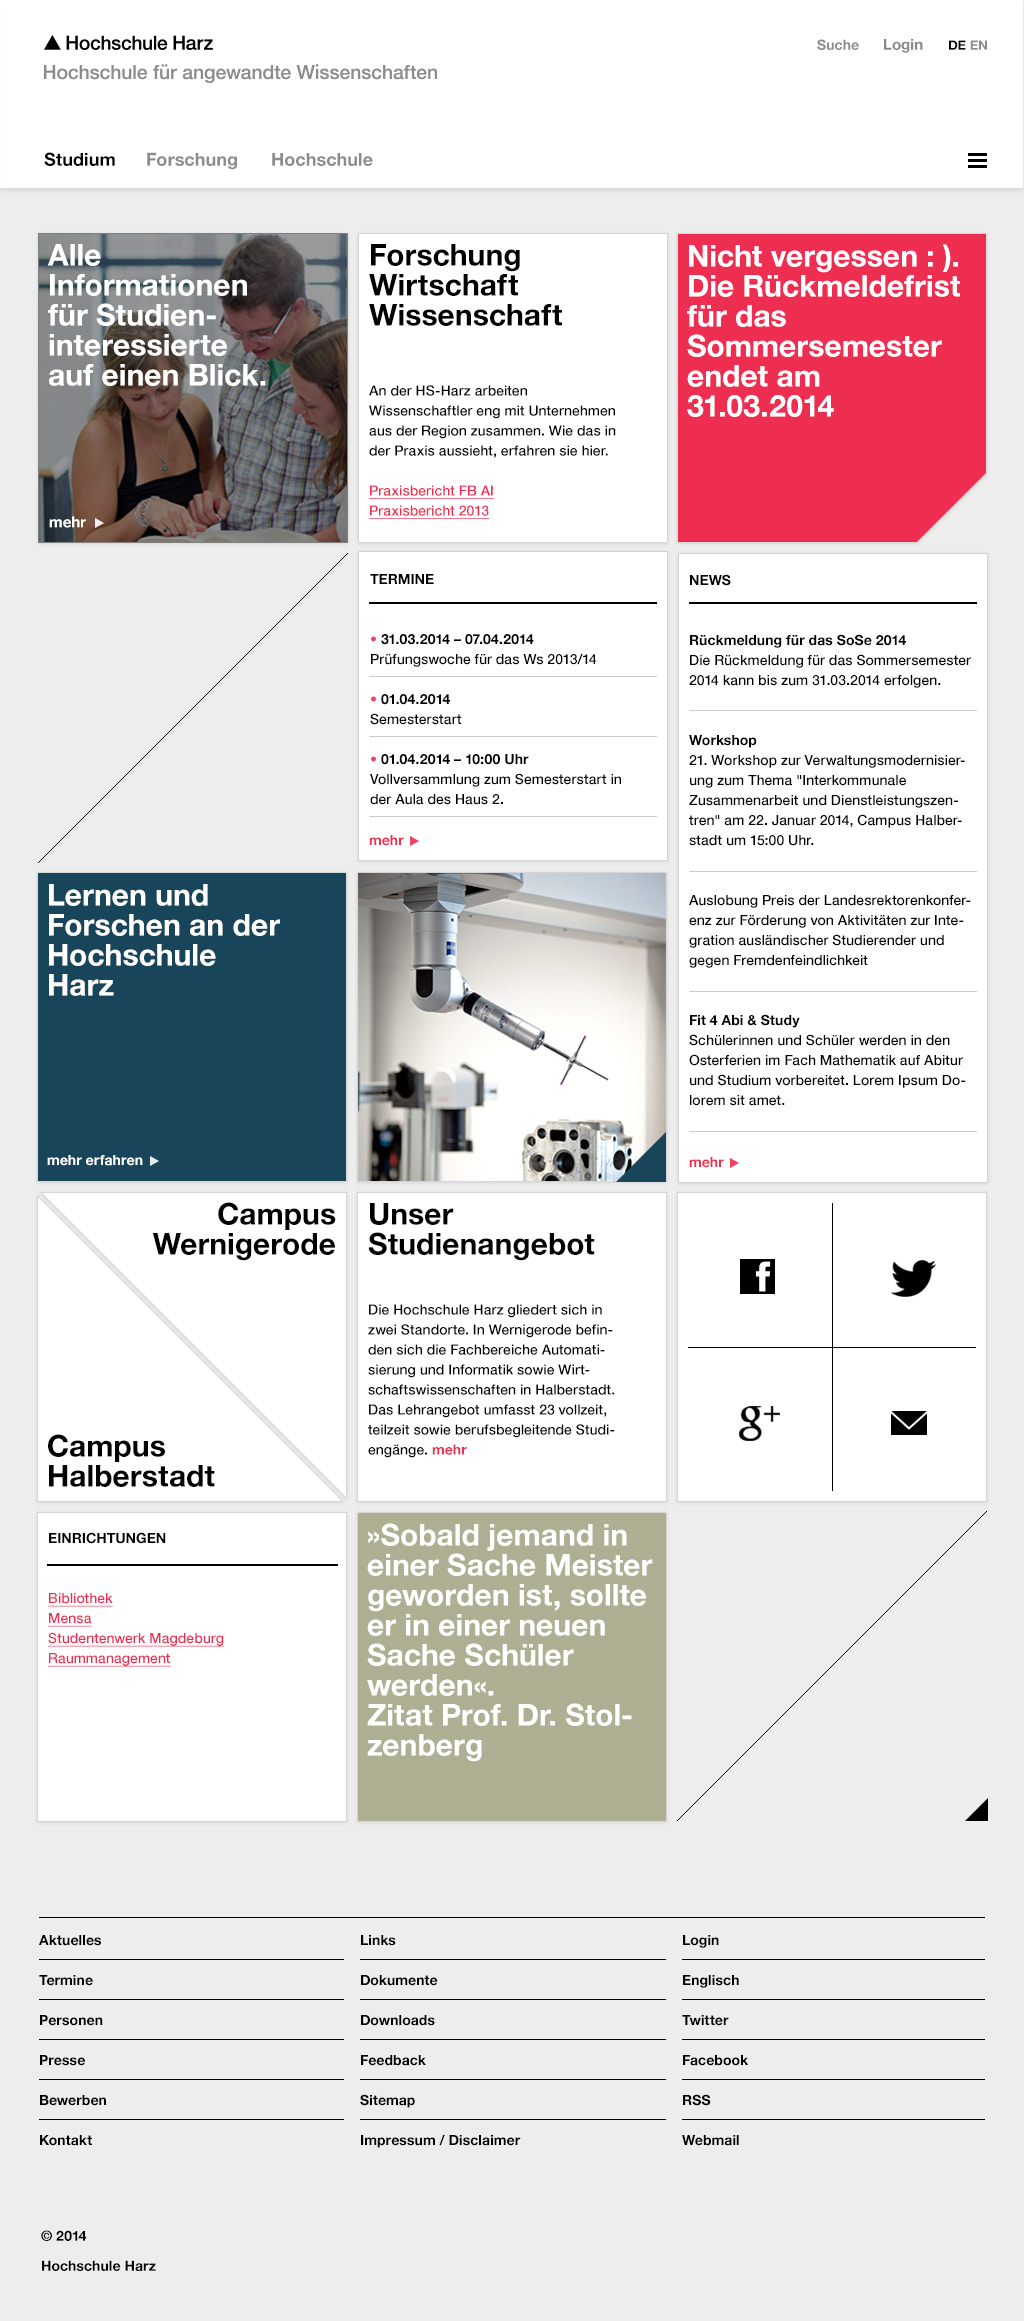 Homepage of the Hochschule Harz with navigation, news and footer